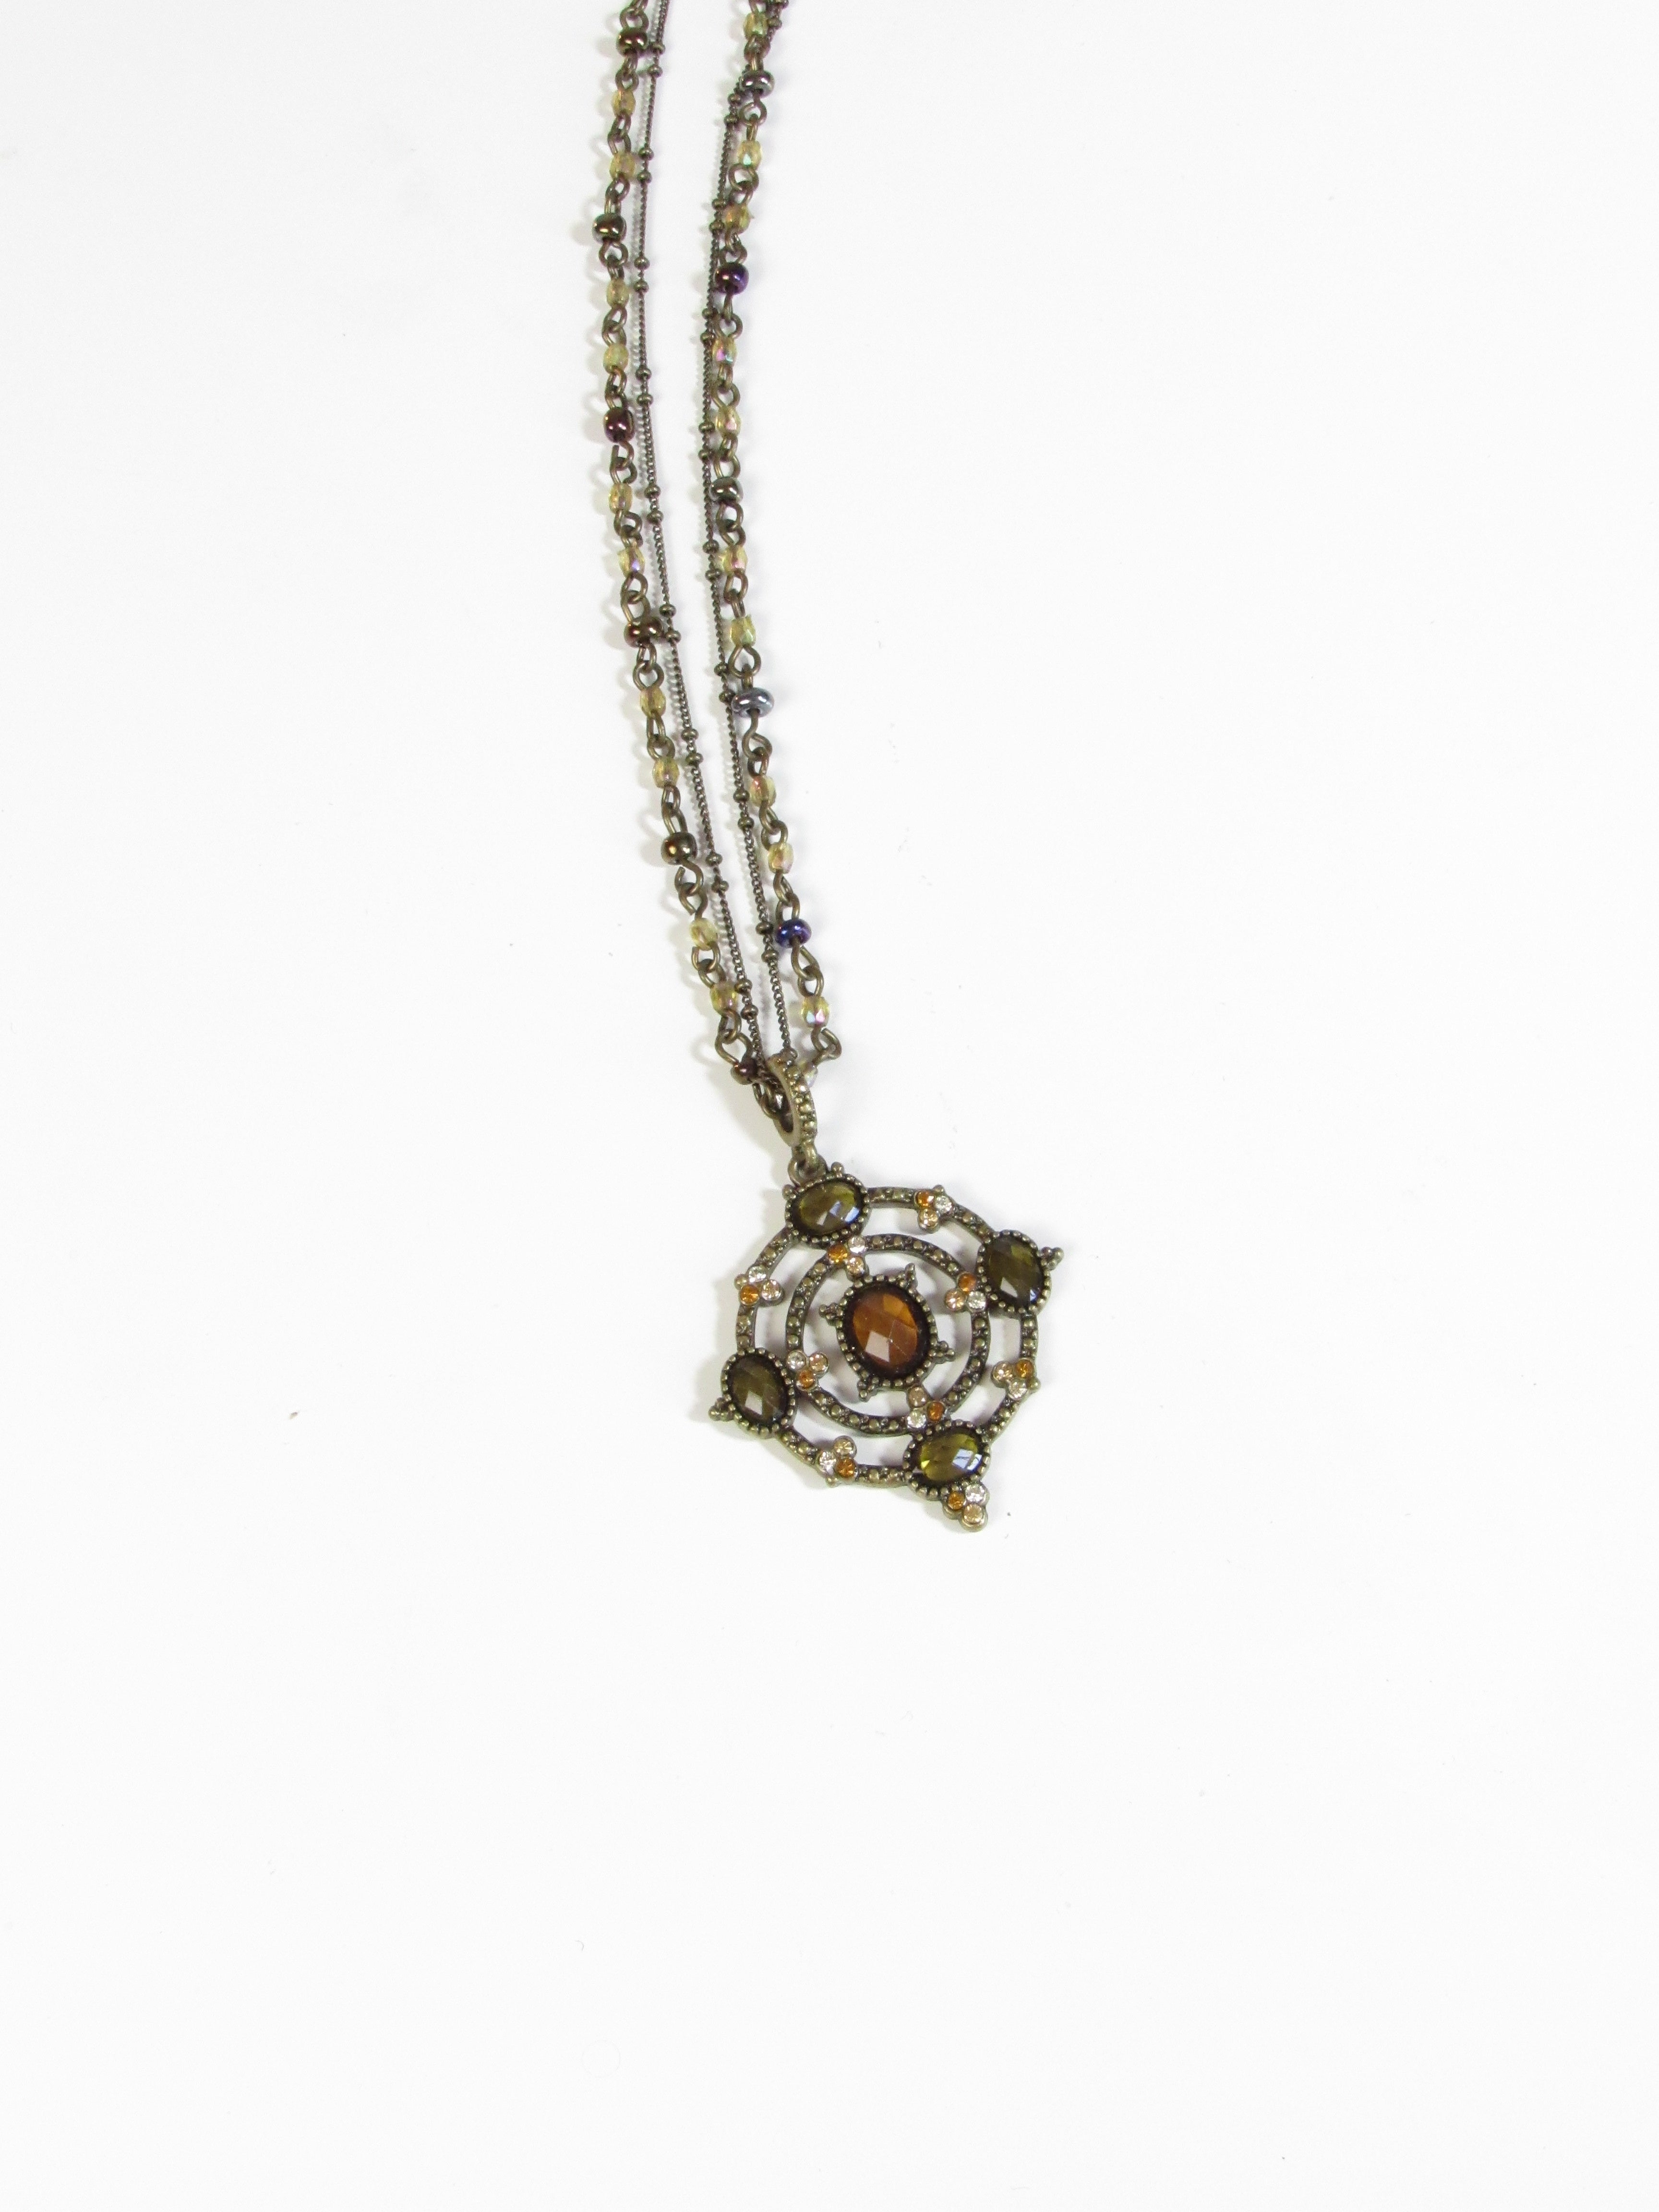 Victorian Antique Gold Finish Double Chain Pendant Necklace with Crystal